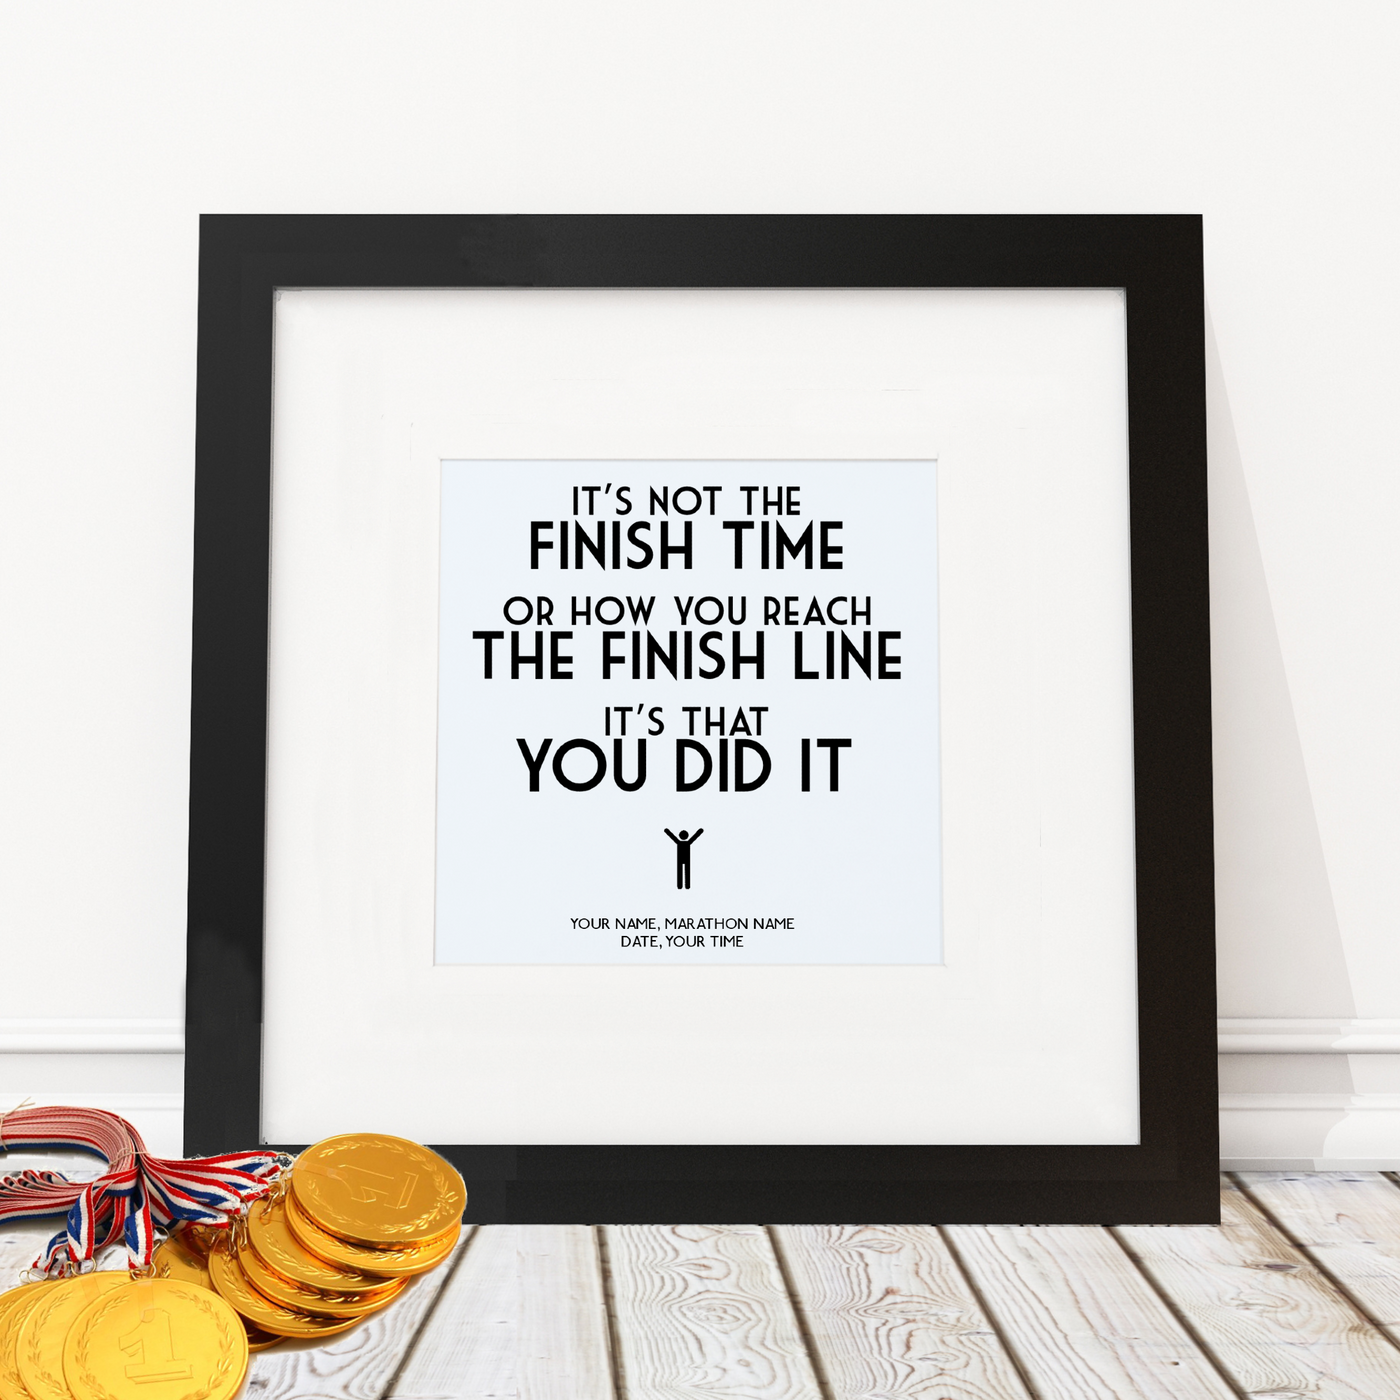 Personalised - It's that you did it - Framed Print